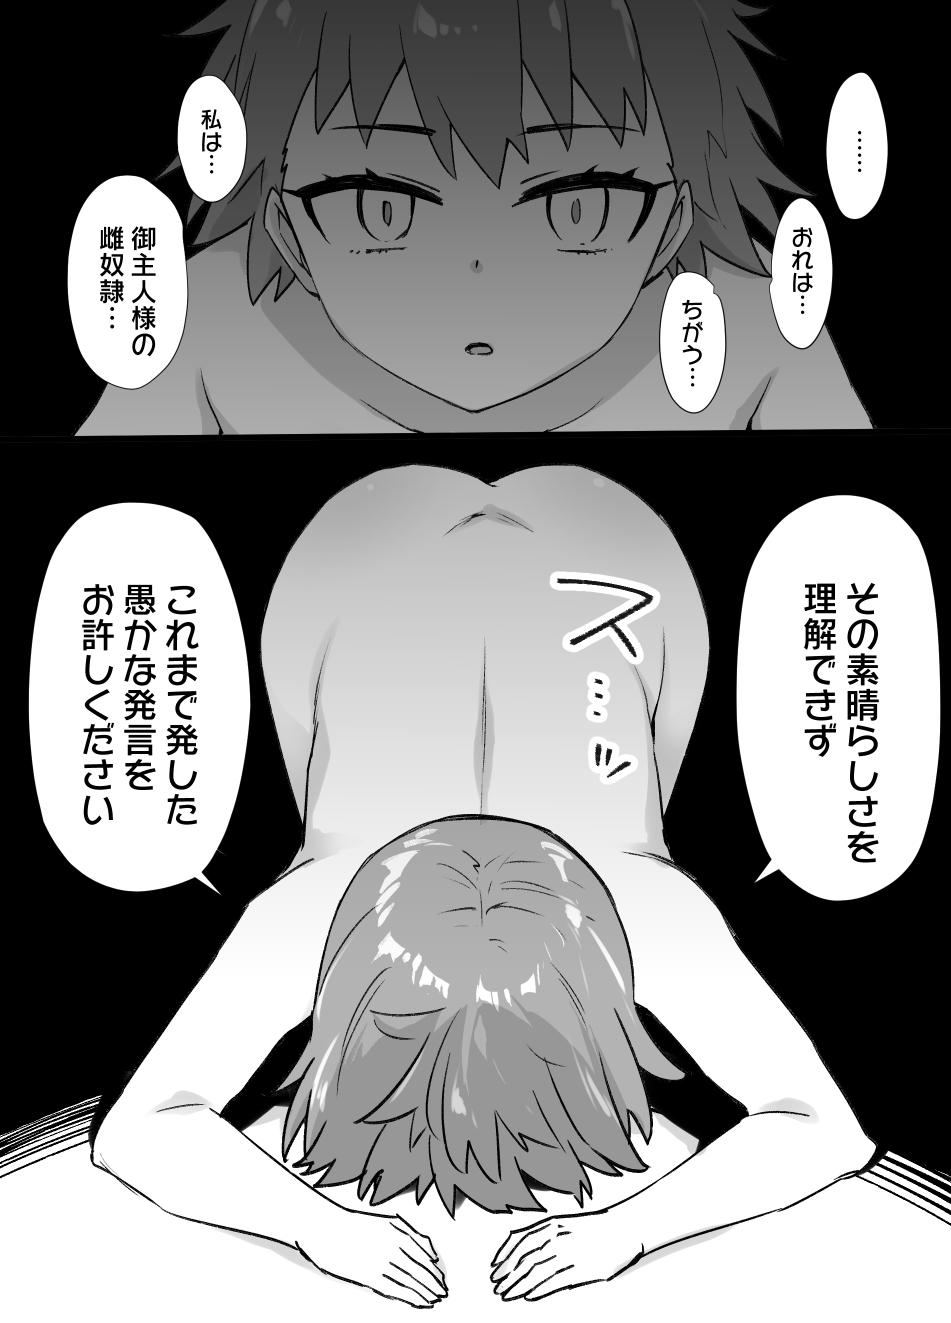 Playing A manga about Shirou Emiya who went to save Rin Tohsaka from captivity and is transformed into a female slave through physical feminization and brainwashing[Fate/ stay night) - Fate stay night Thailand - Page 6